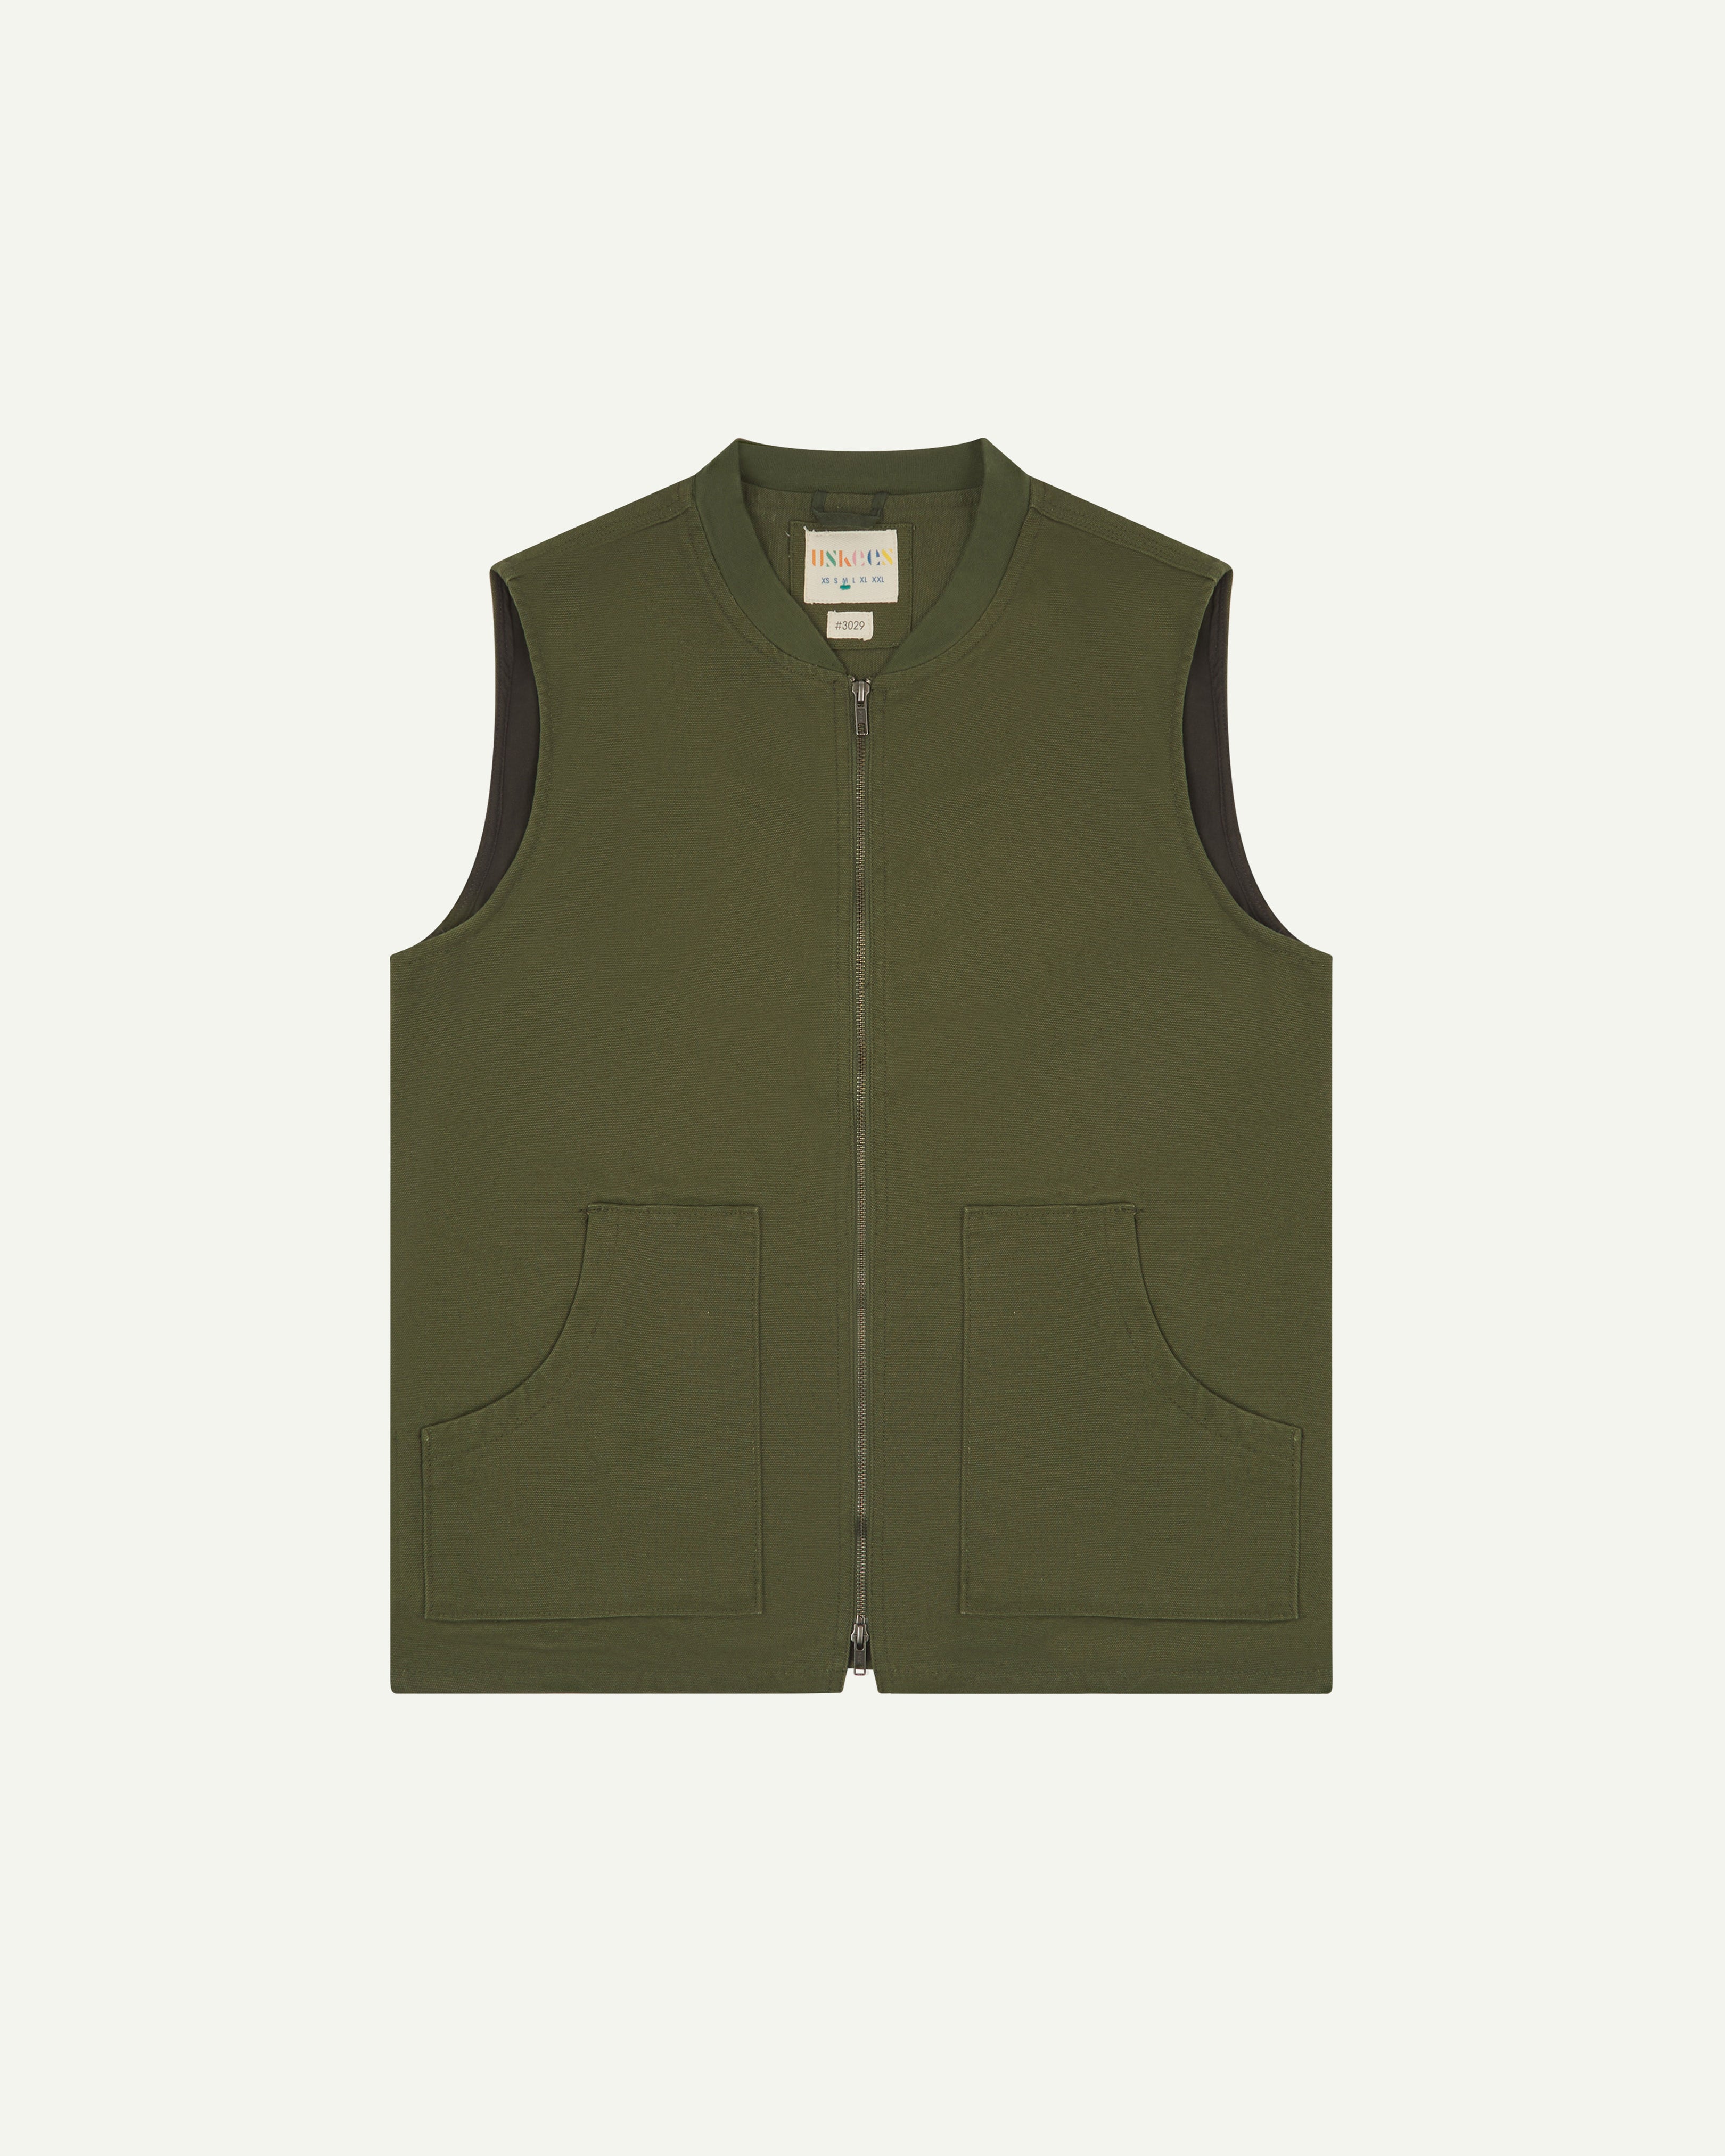 front flat shot of uskees green gilet-type zip front waistcoat showing the front pockets and inner brand label at neck